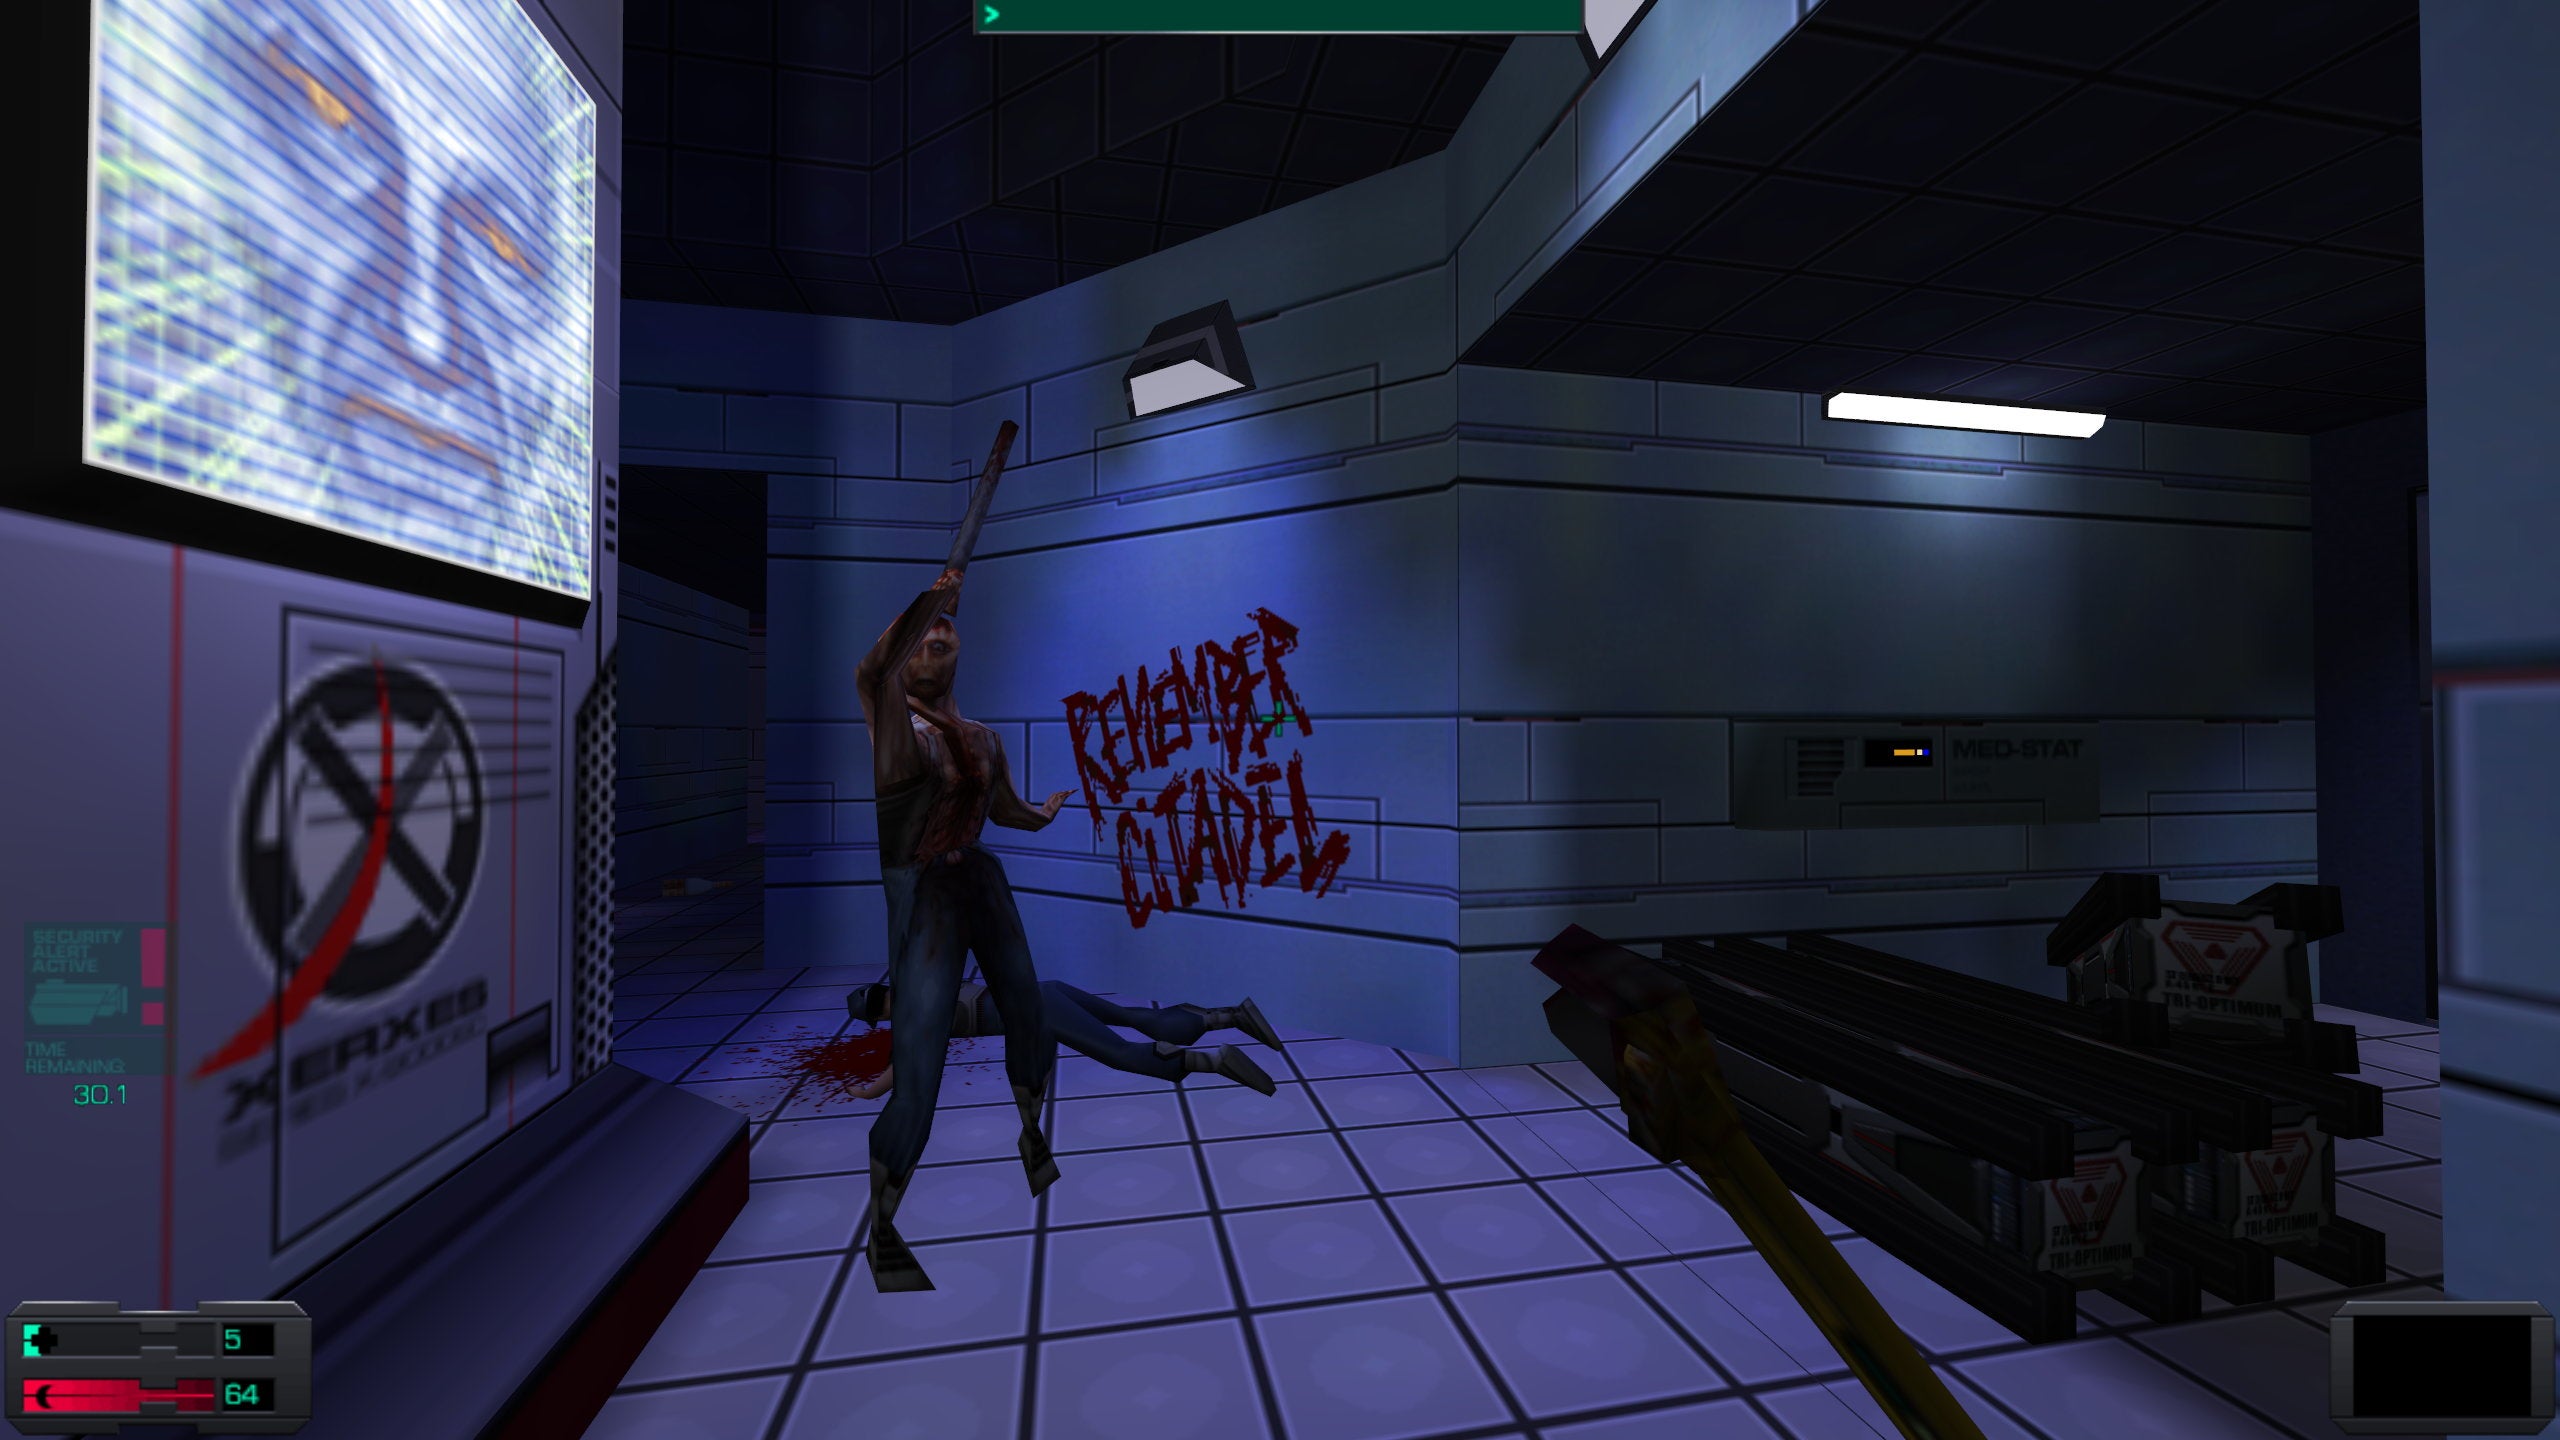 A Shotgun Hybrid attacking the player in System Shock 2. 